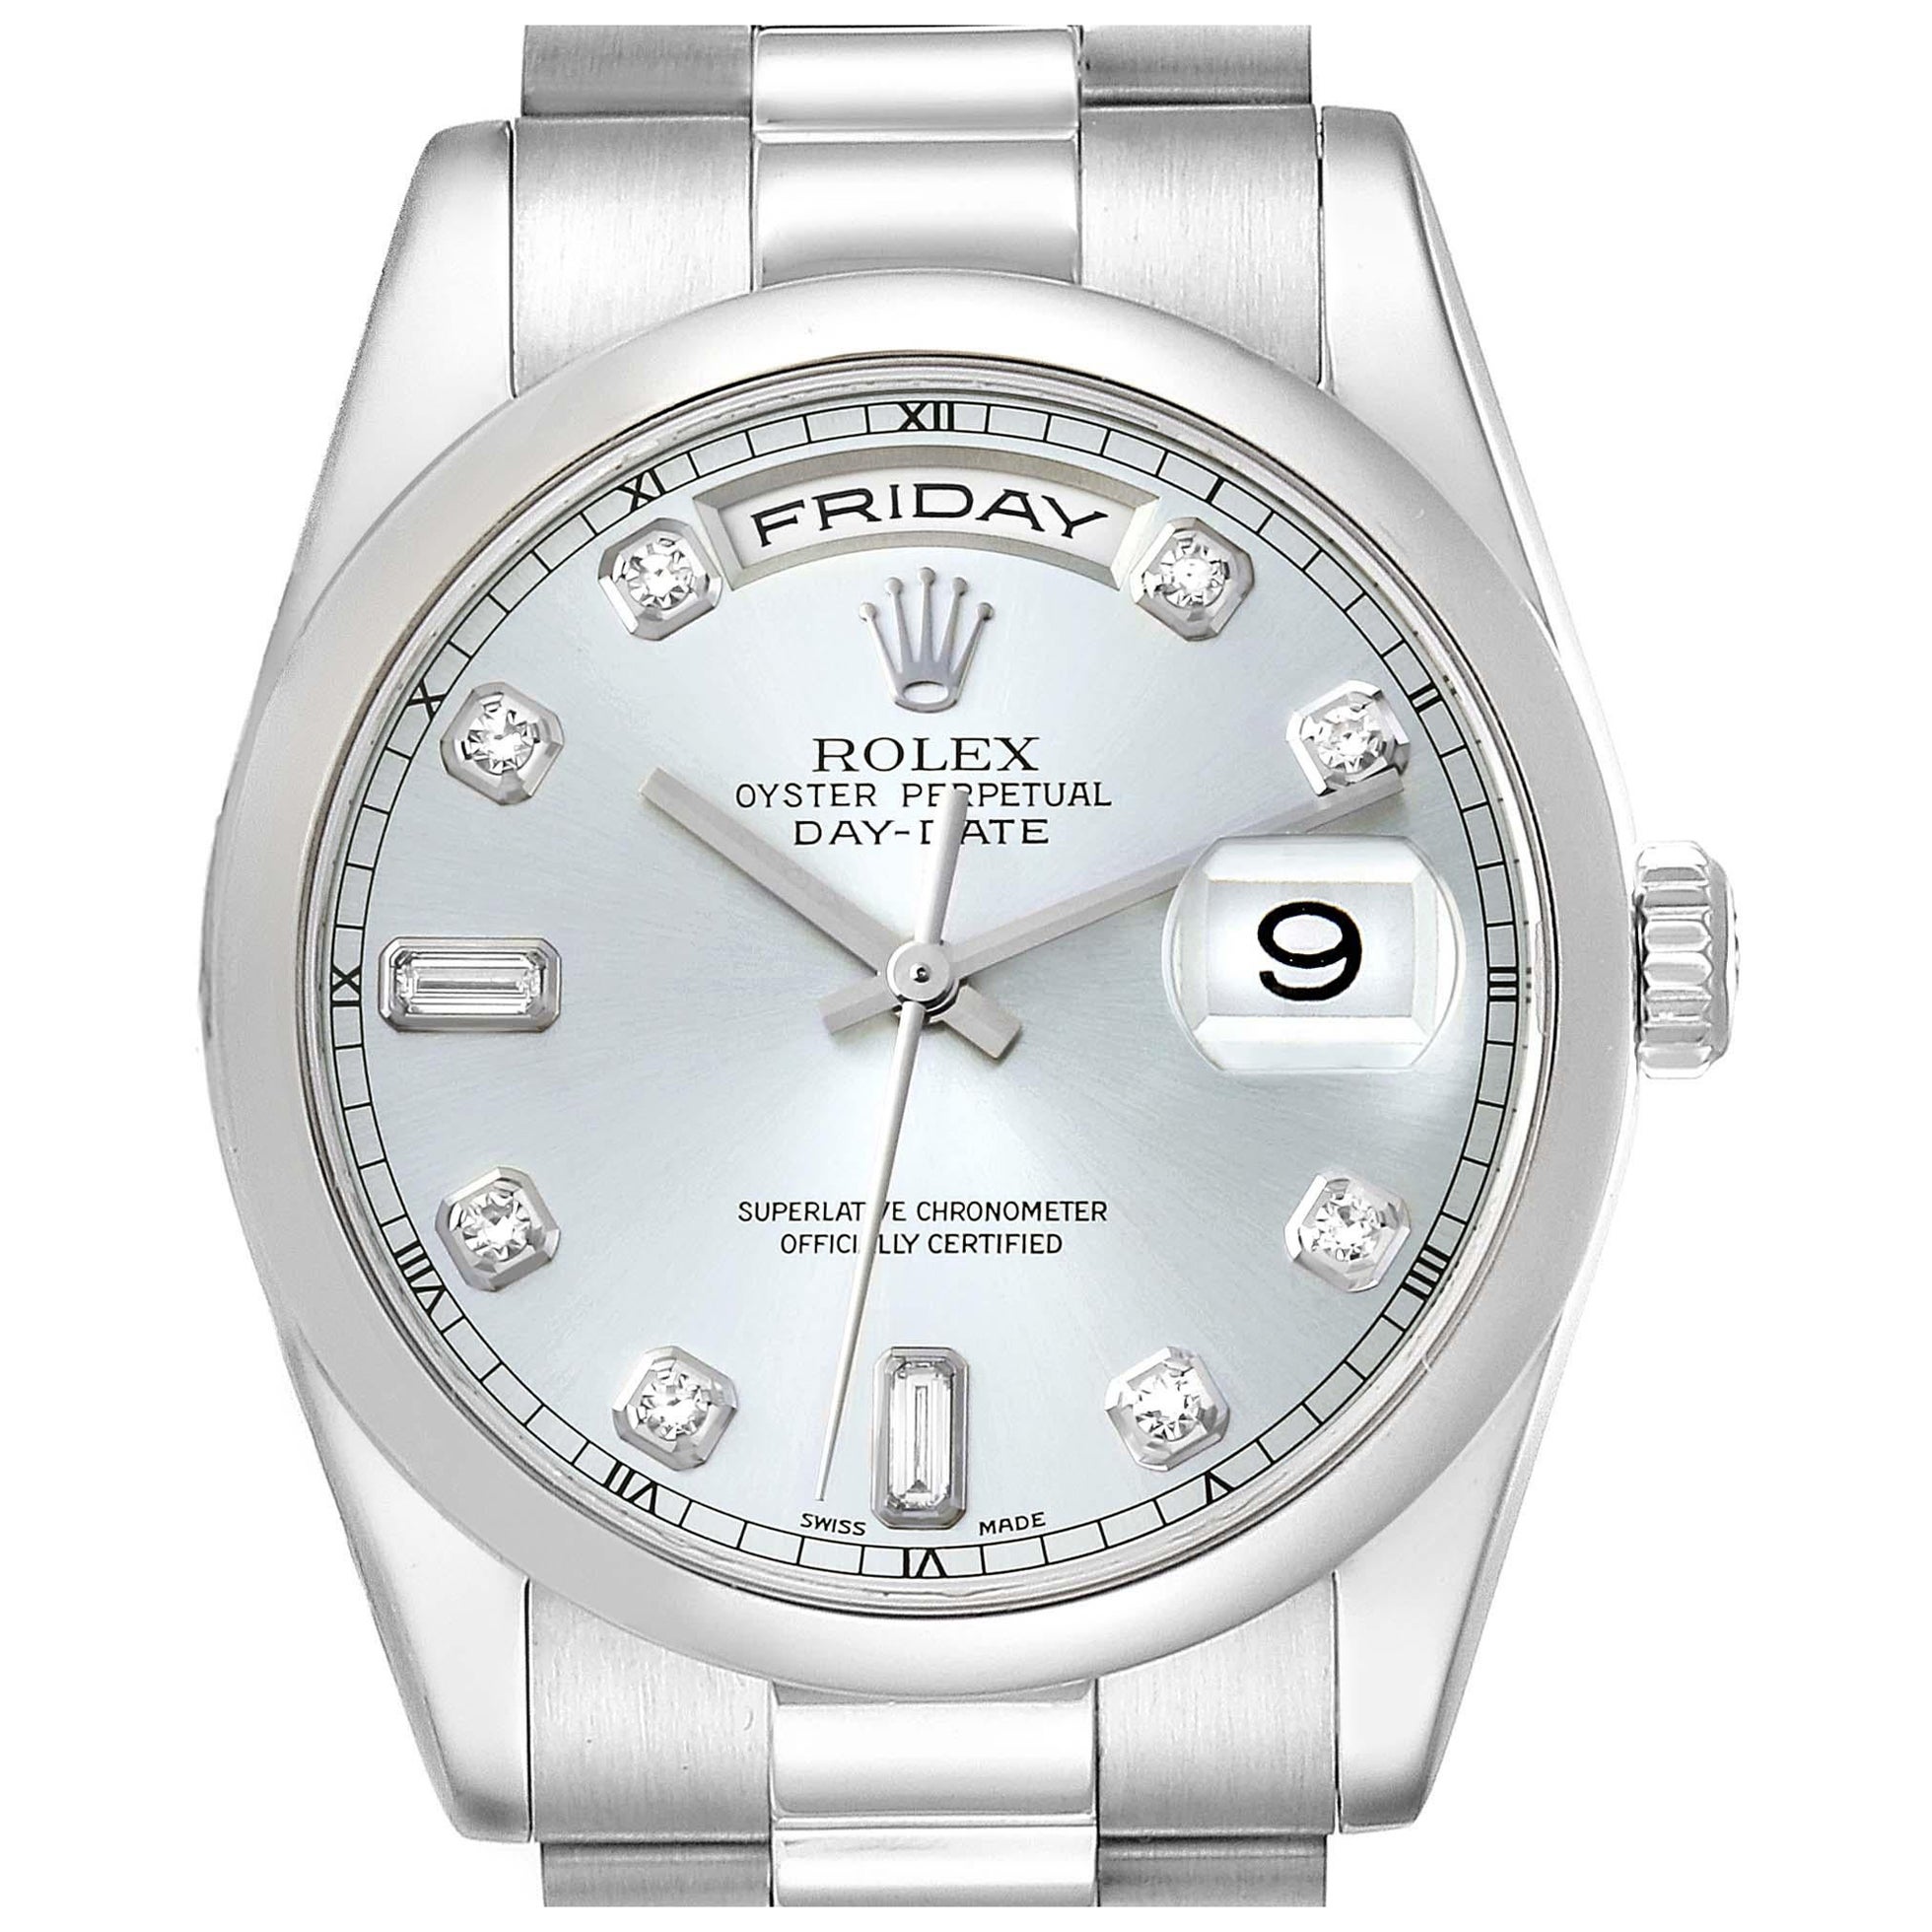 Rolex Day-Date President Diamond Dial Platinum Mens Watch 118206 Box Papers For Sale